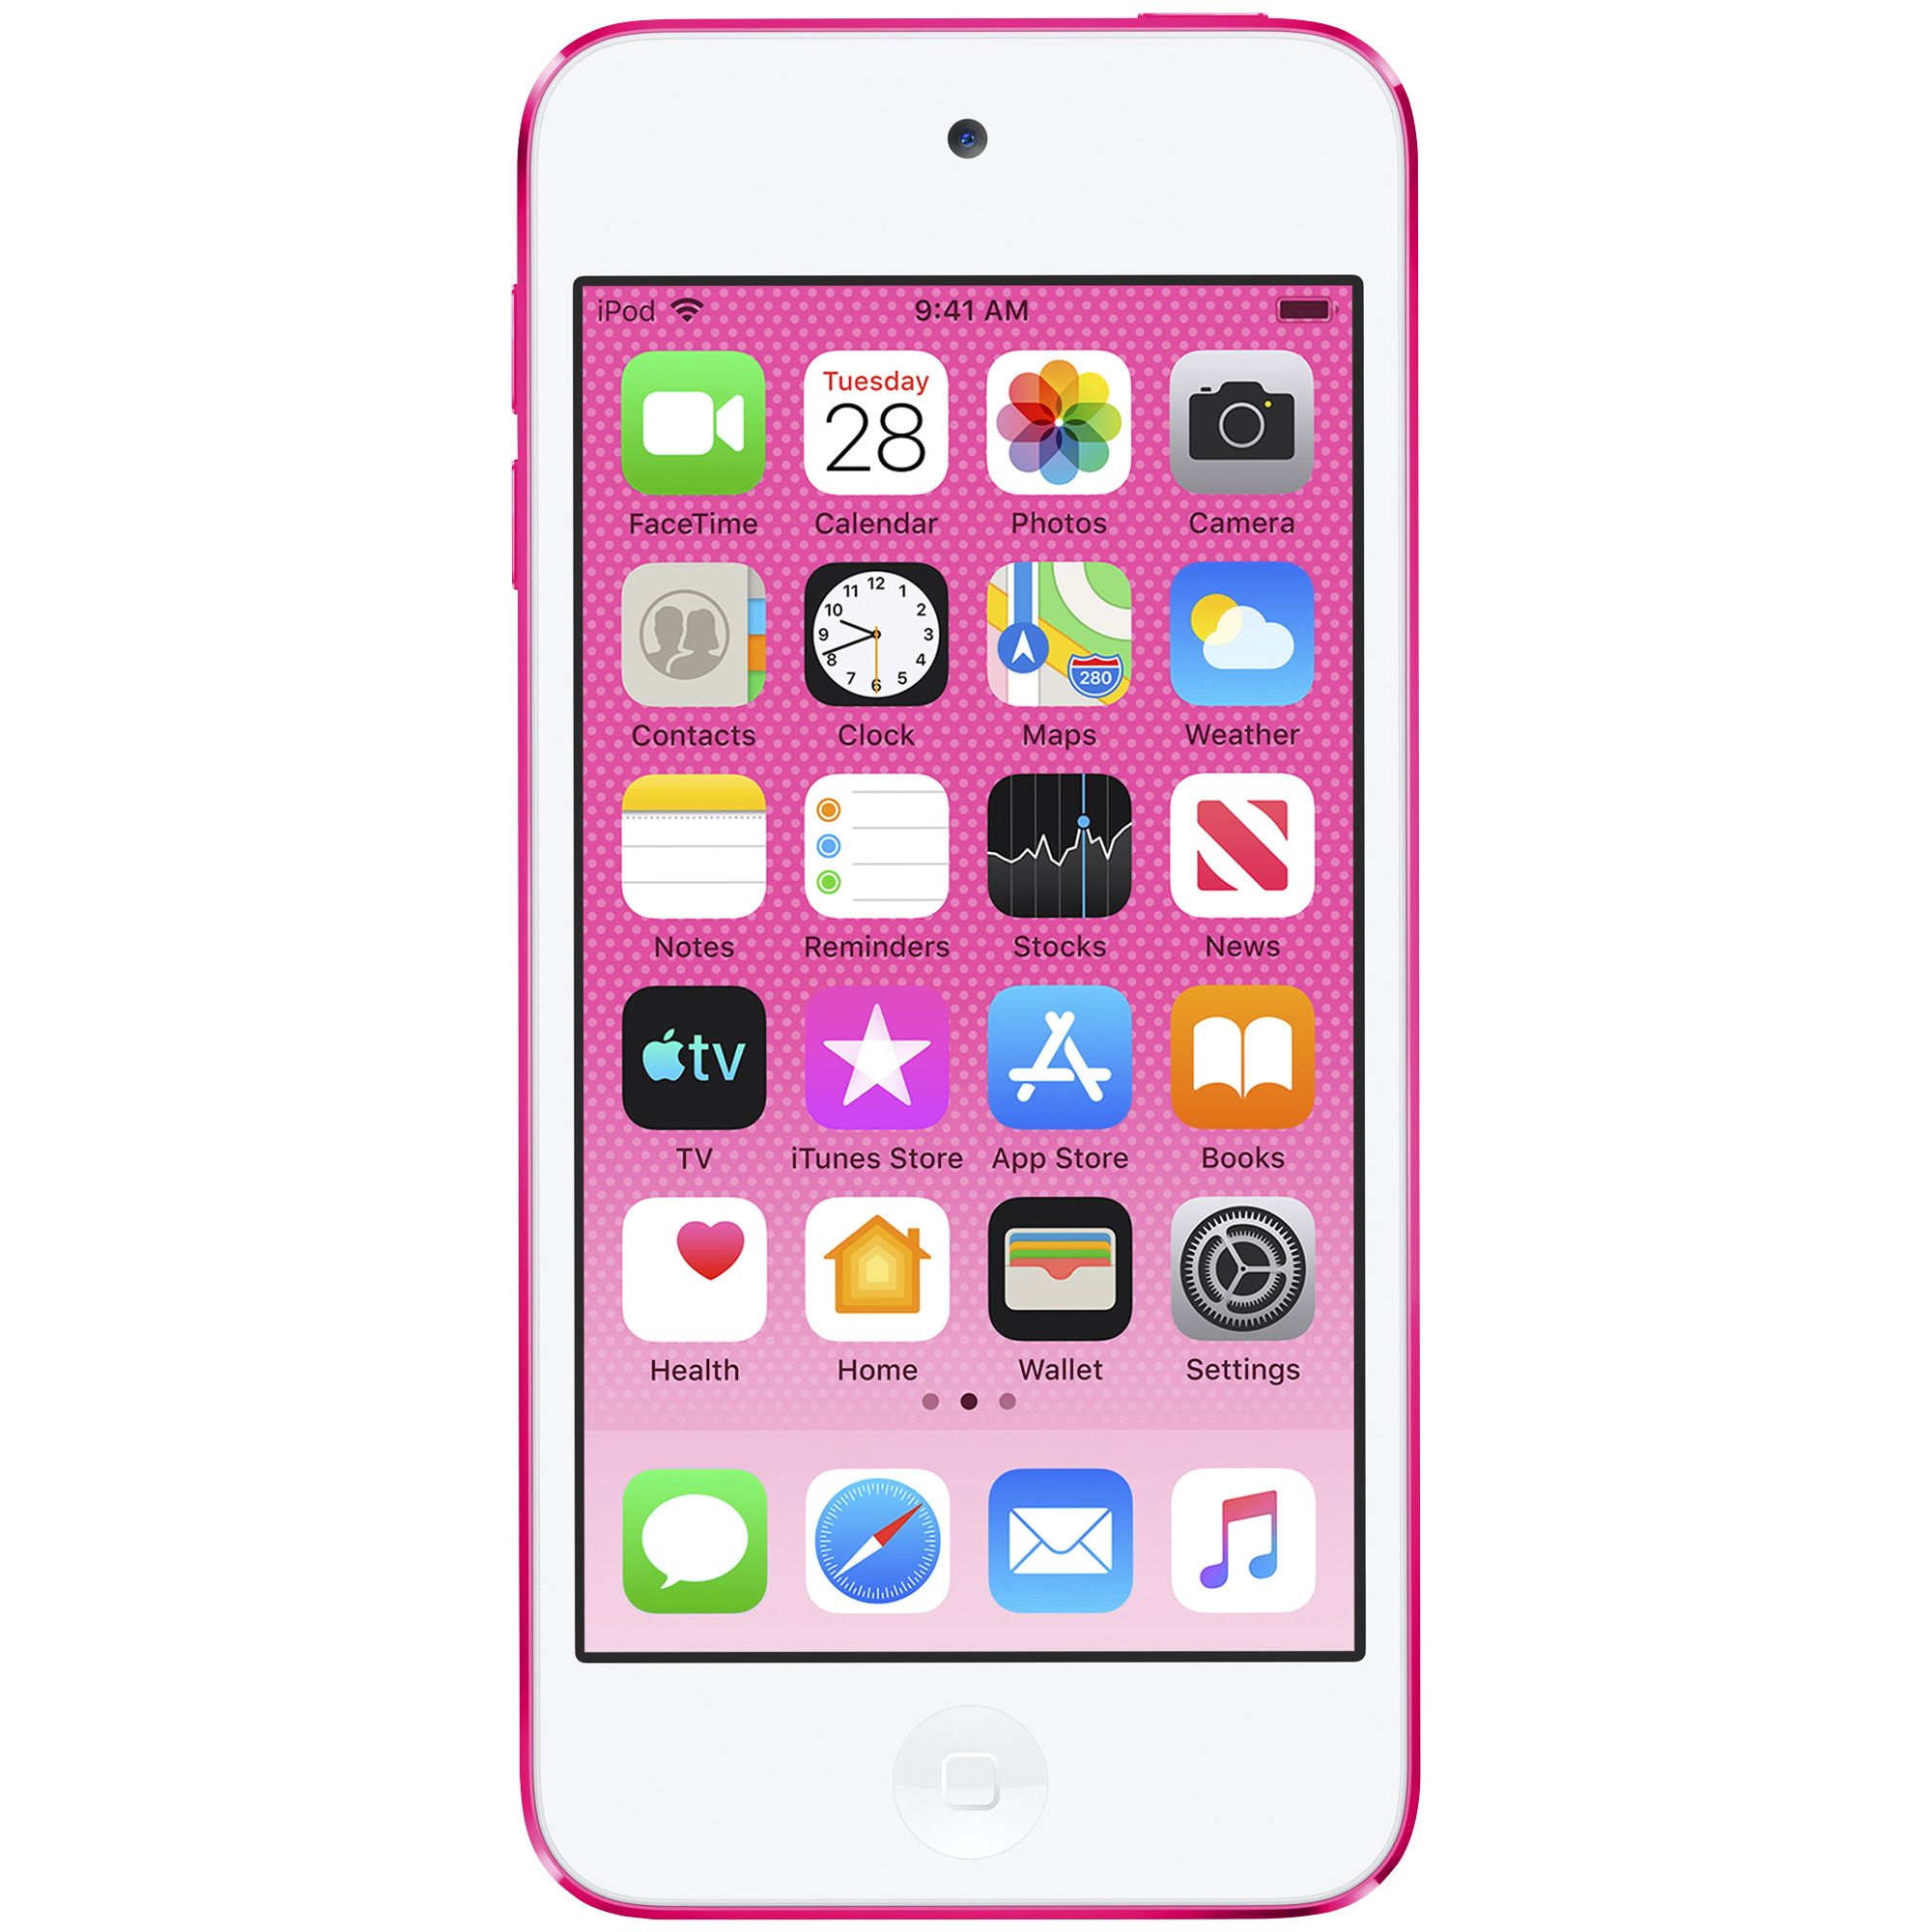 Fingerhut - Apple iPod touch 32GB 7th Generation with 4